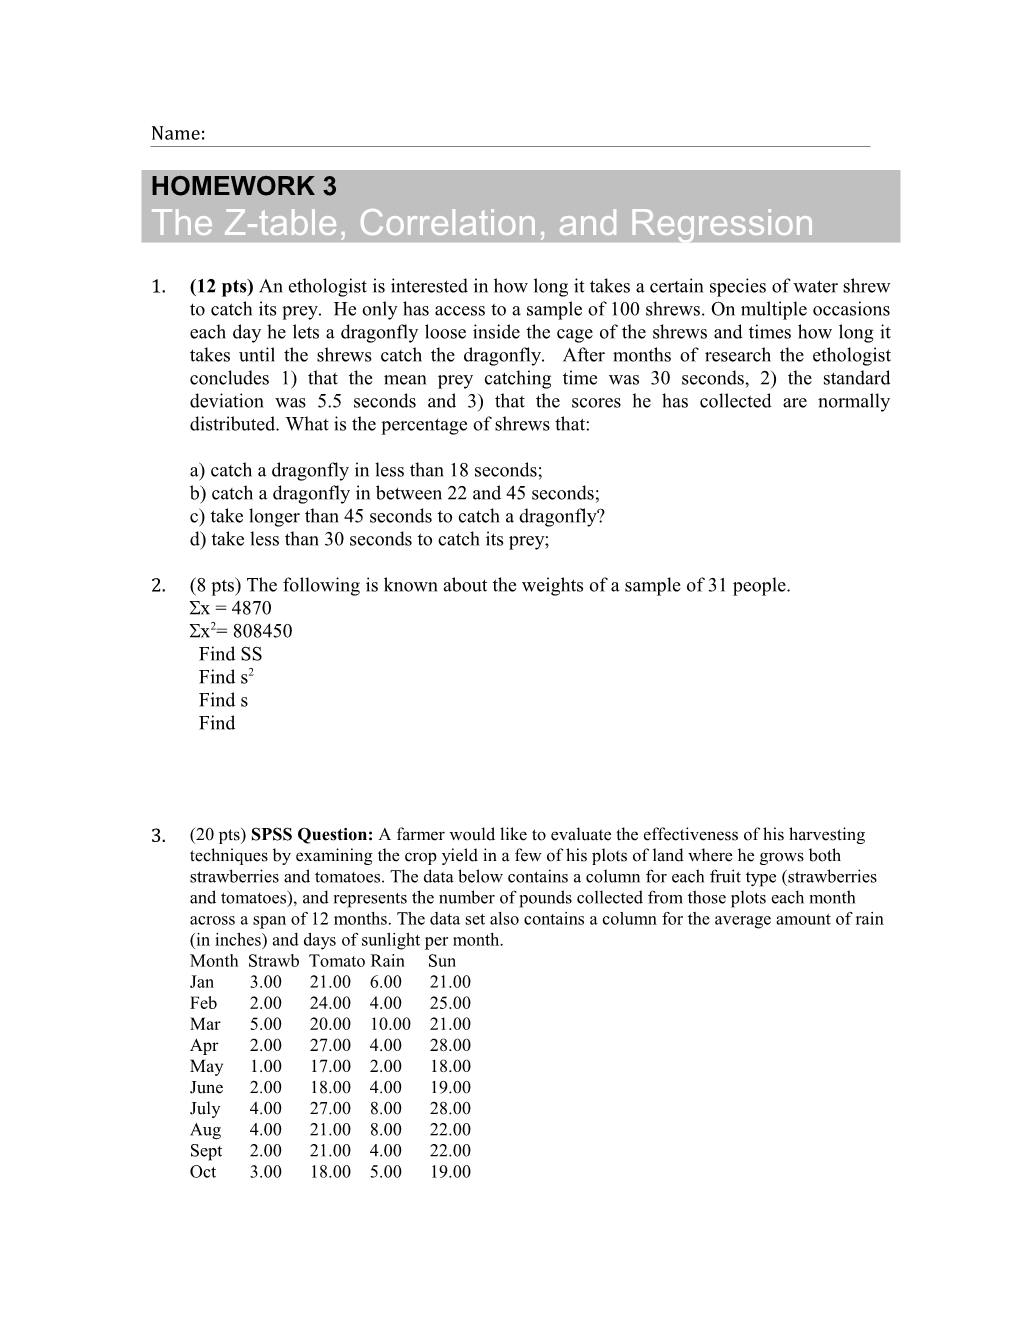 HOMEWORK 3 the Z-Table, Correlation, and Regression